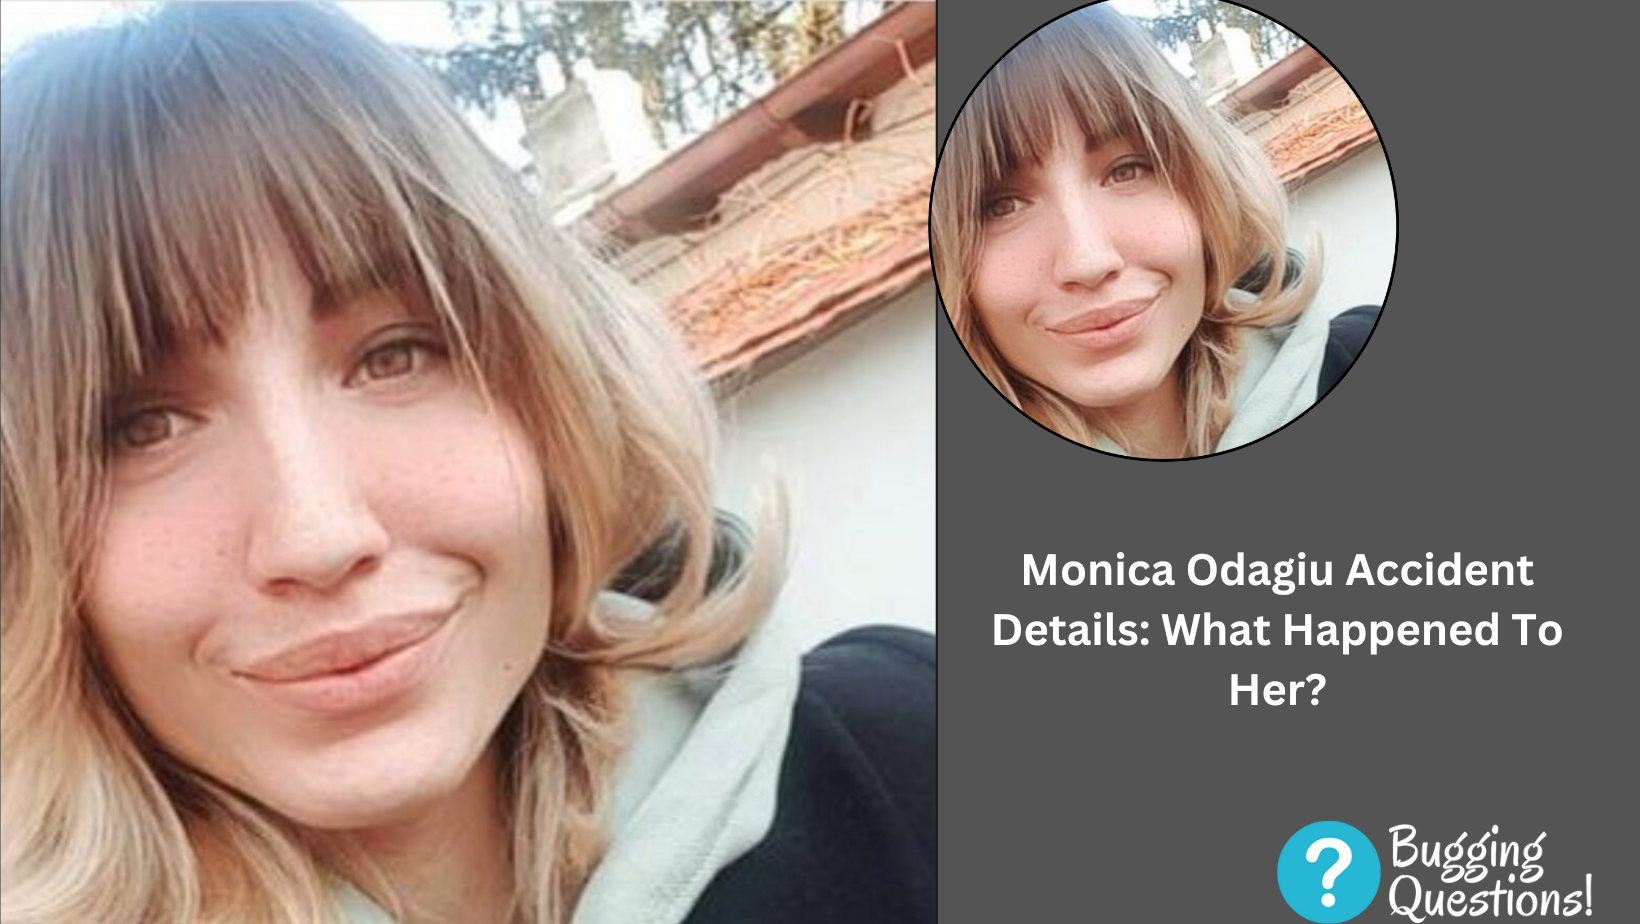 Monica Odagiu Accident Details: What Happened To Her?